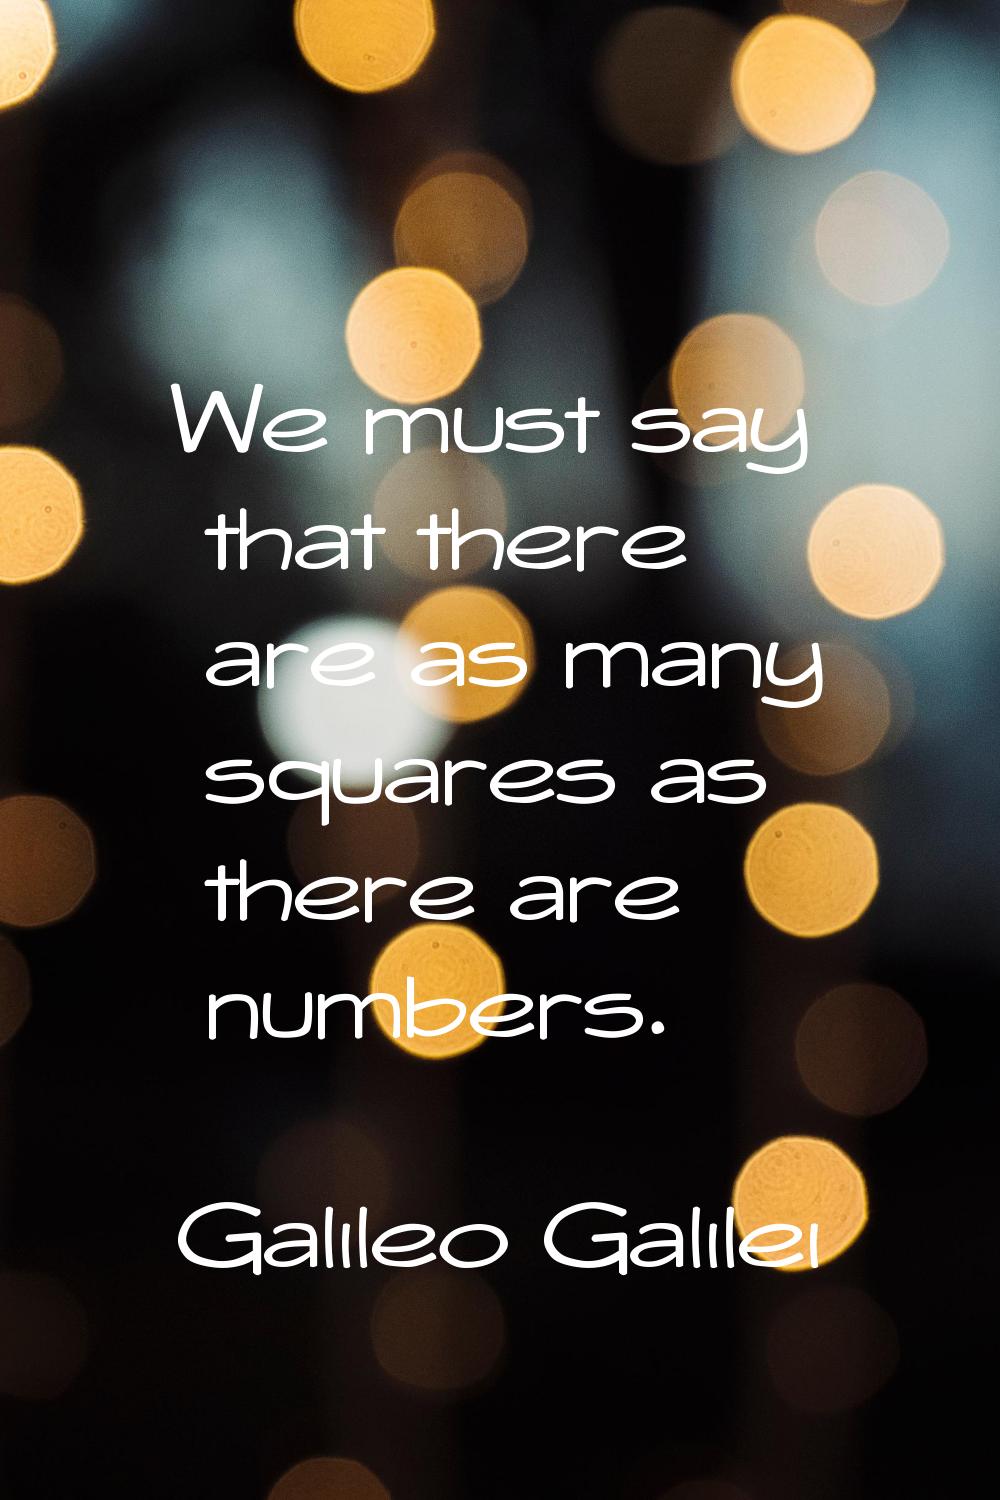 We must say that there are as many squares as there are numbers.